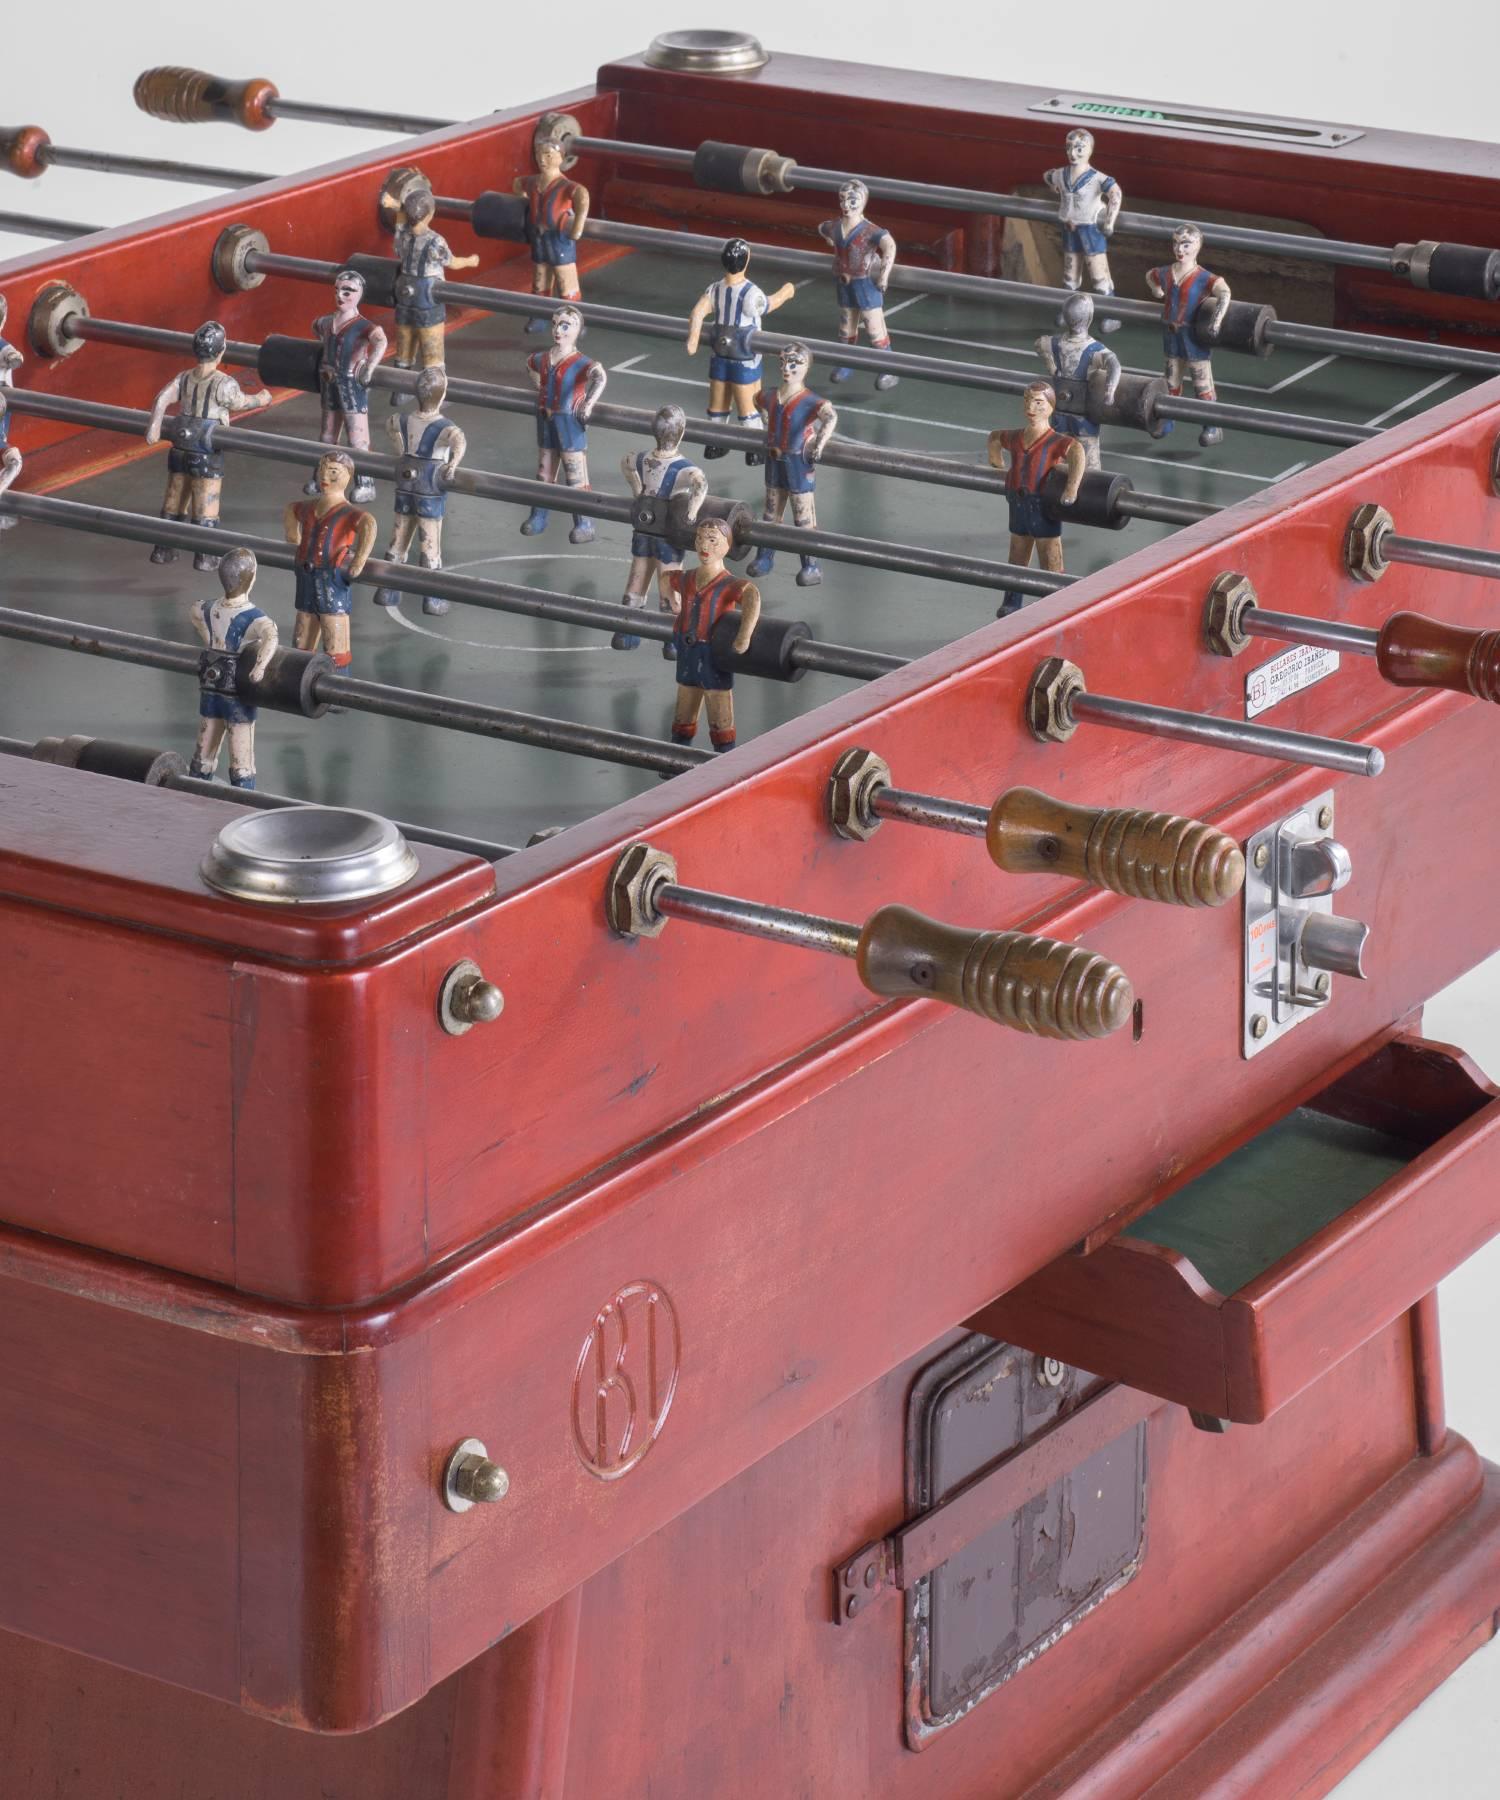 Spanish Foosball Table, circa 1960

Painted wood football game table with hand-painted metal players and original balls. Marked: Billares Ibañez, Gregorio Ibañez, S.A.

Measures: 65